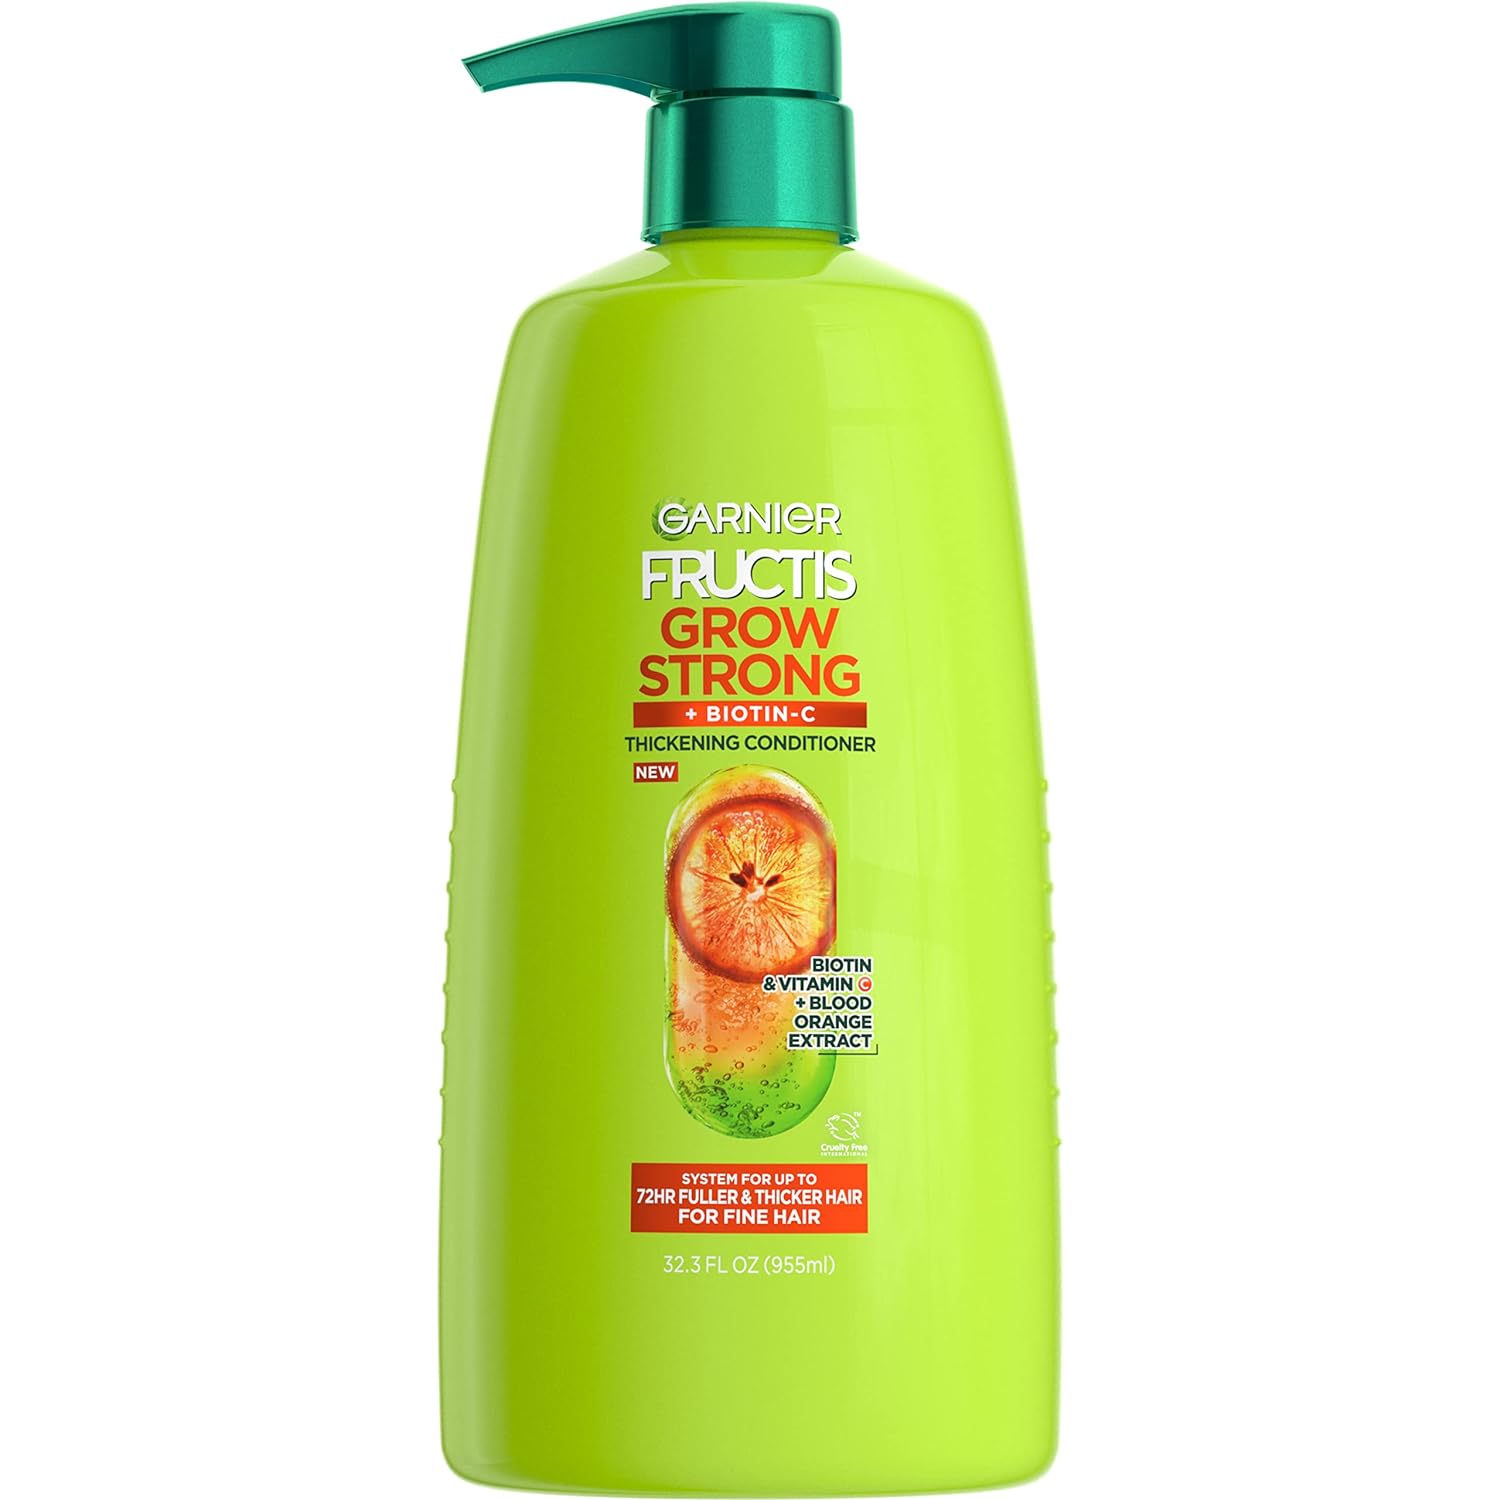 Garnier Fructis Grow Strong Thickening Conditioner for Fine Hair, Biotin-C, 32.3 Fl Oz, 1 Count (Packaging May Vary)